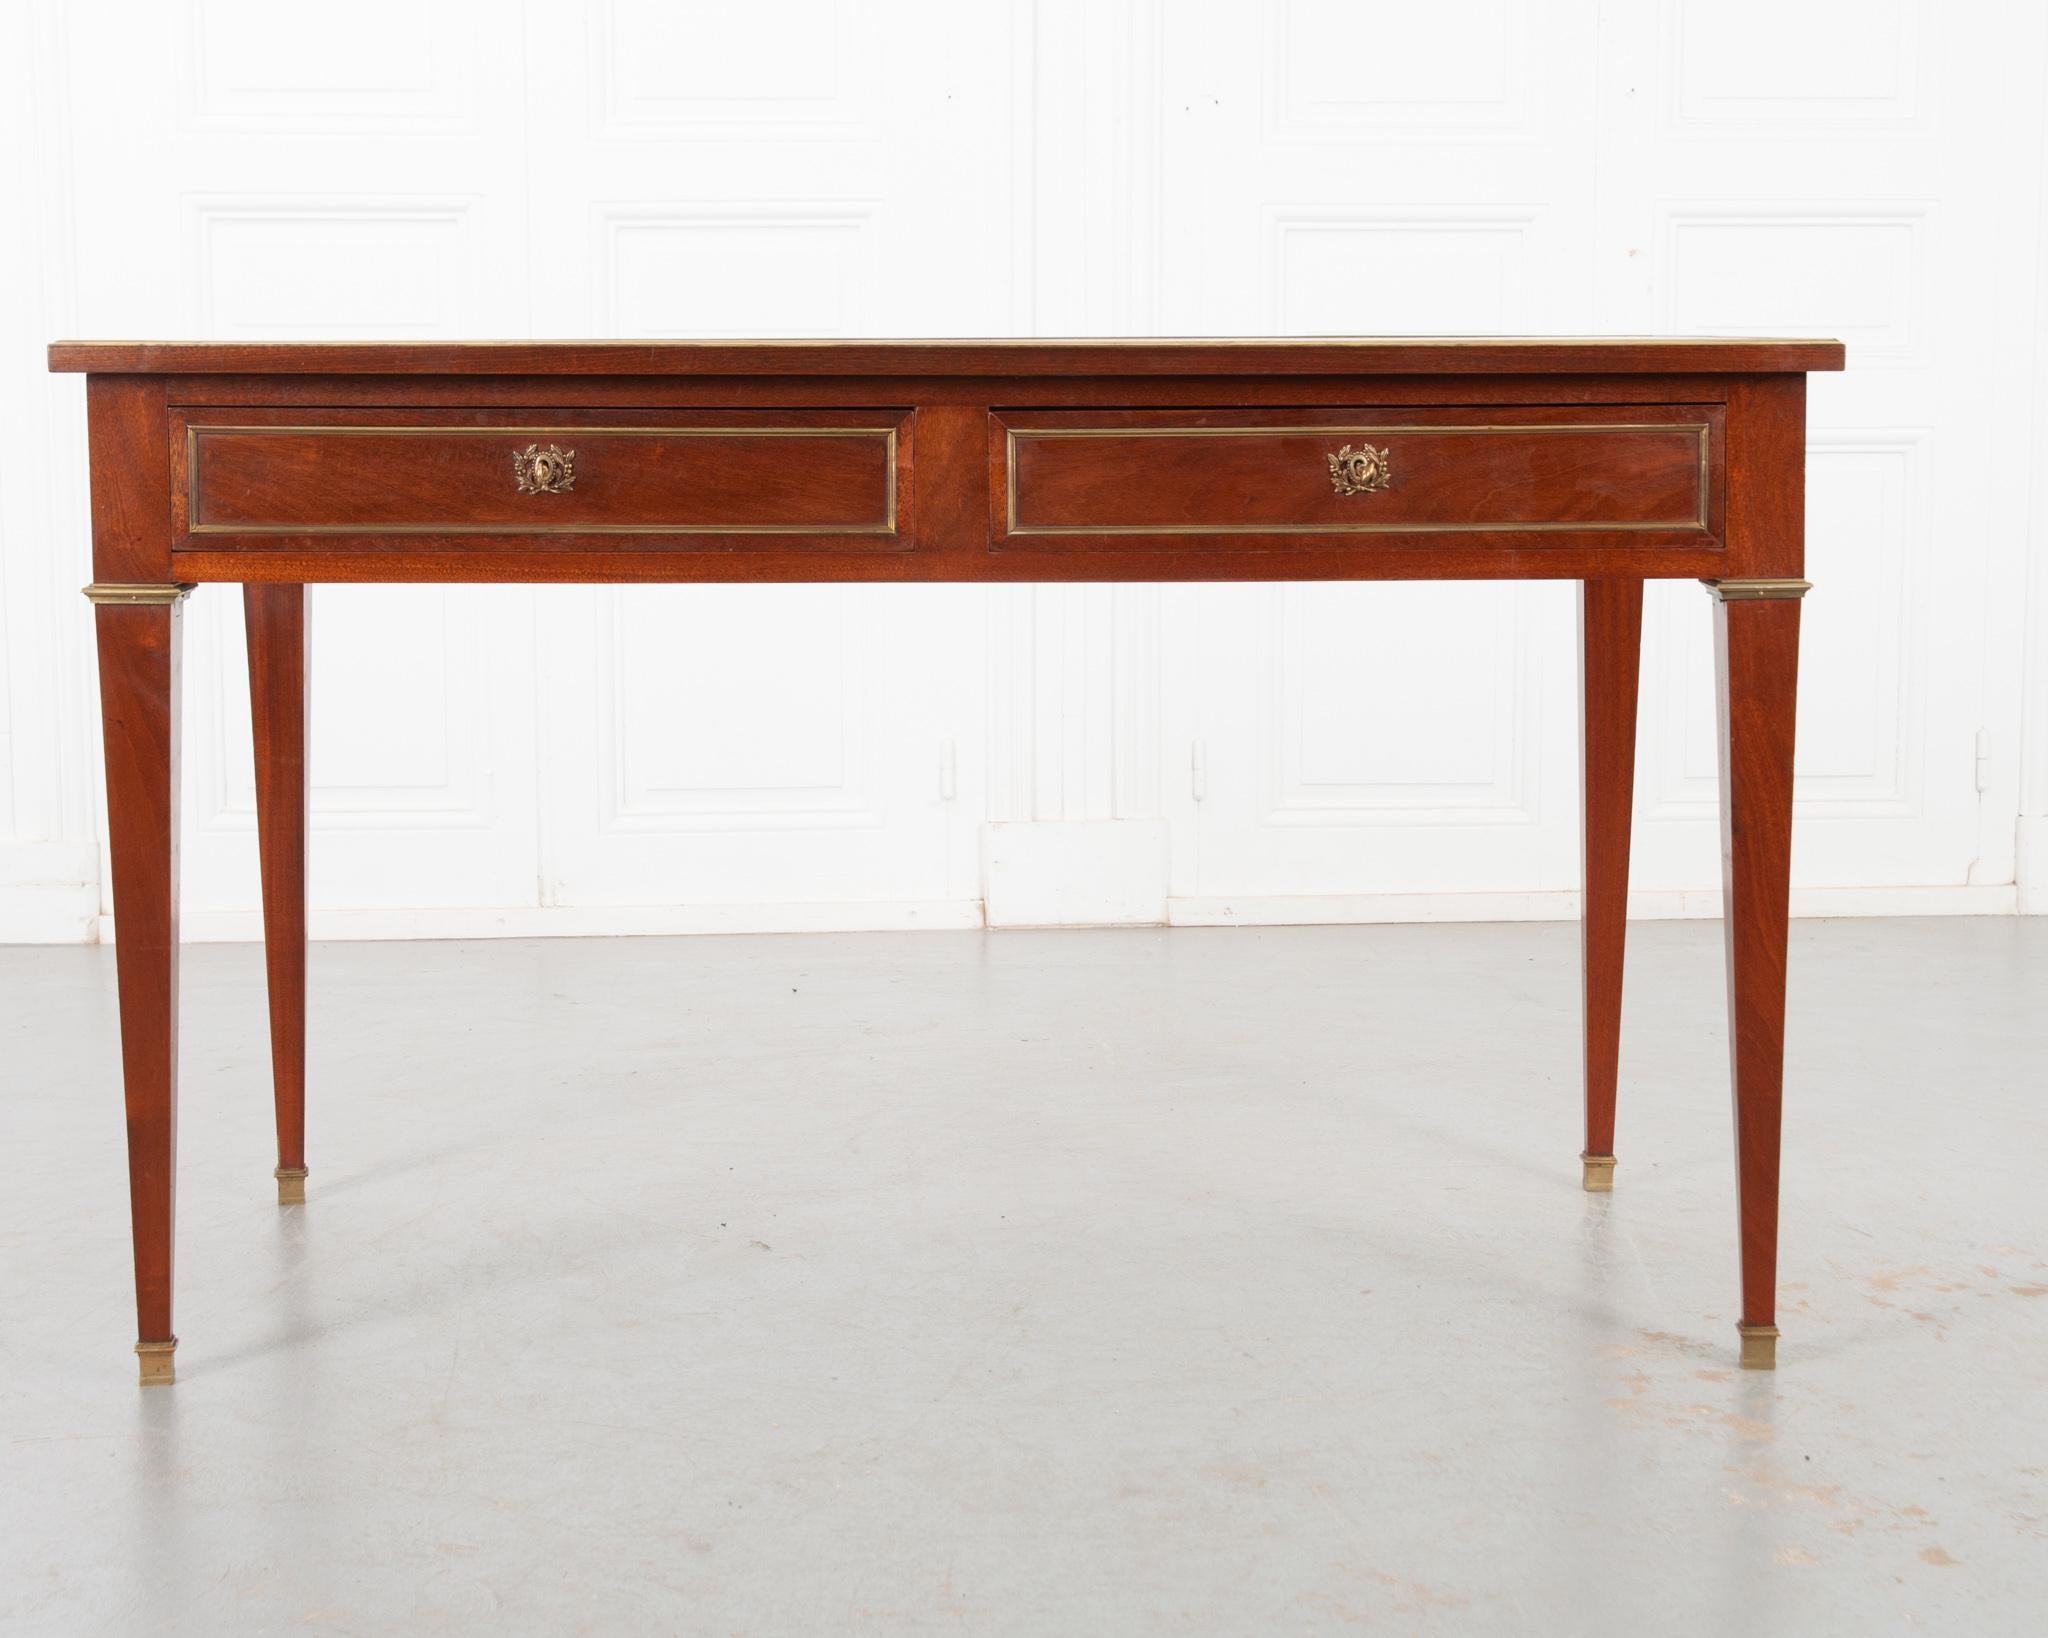 A studious transitional style desk from France, circa 1850. Writing surface and slides inset with caramel toned leather. Wear is consistent with age and use. A thick brass band encircles the edge of the top. With both slides out the maximum width is